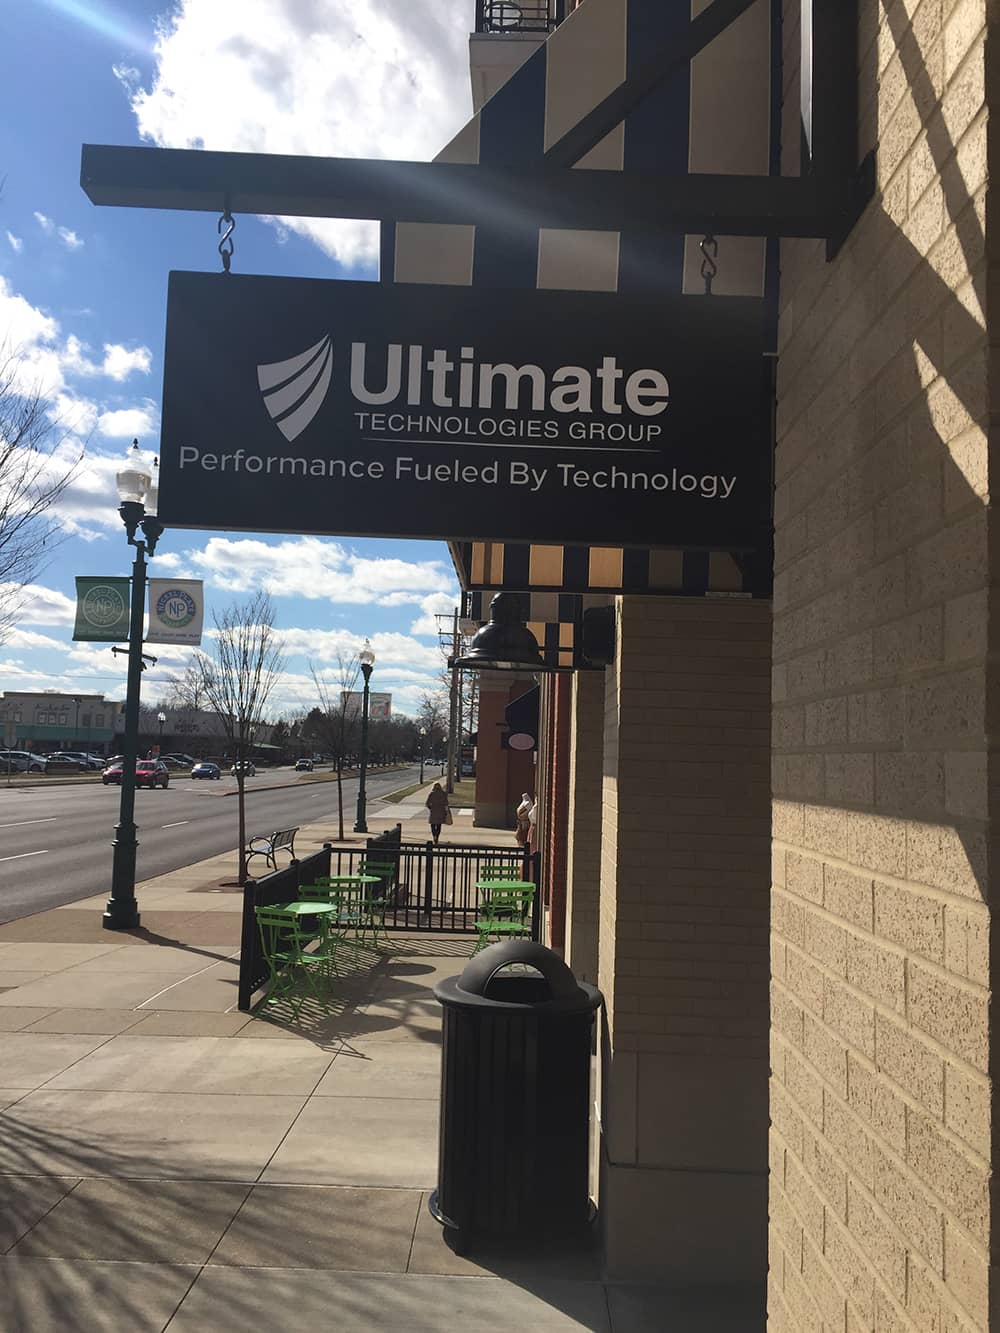 Ultimate Technologies Group board